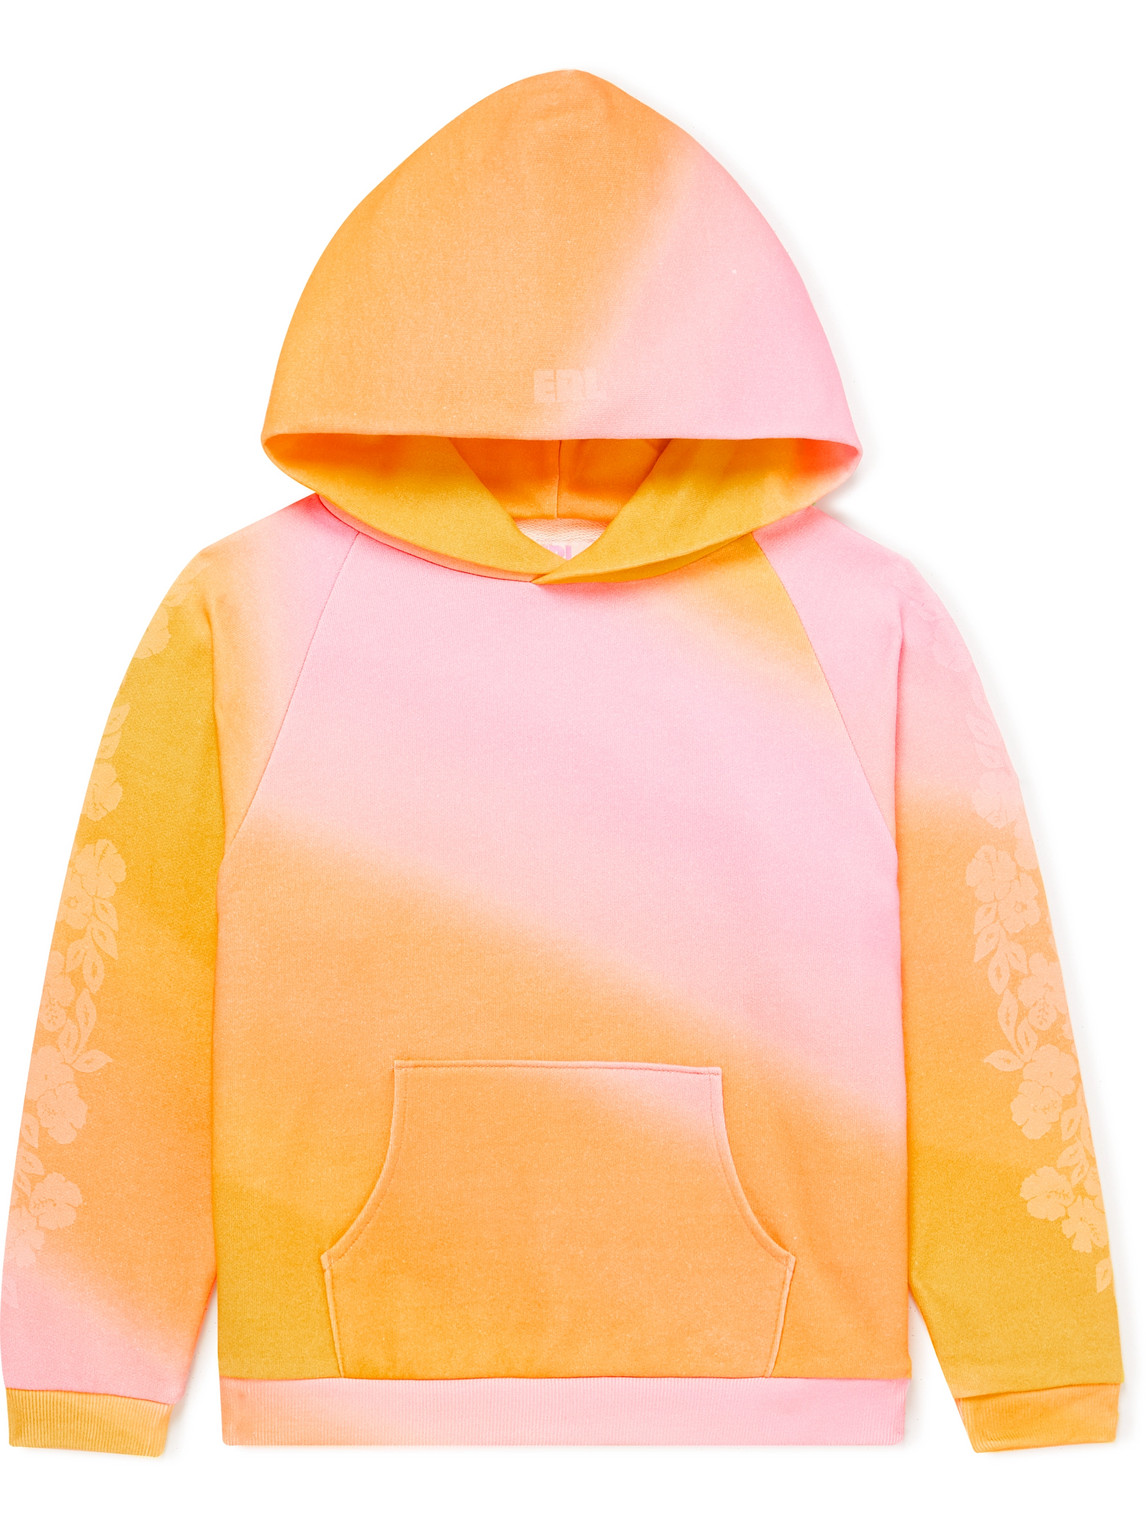 ERL Kids Ombré Printed Cotton-Blend Jersey Hoodie